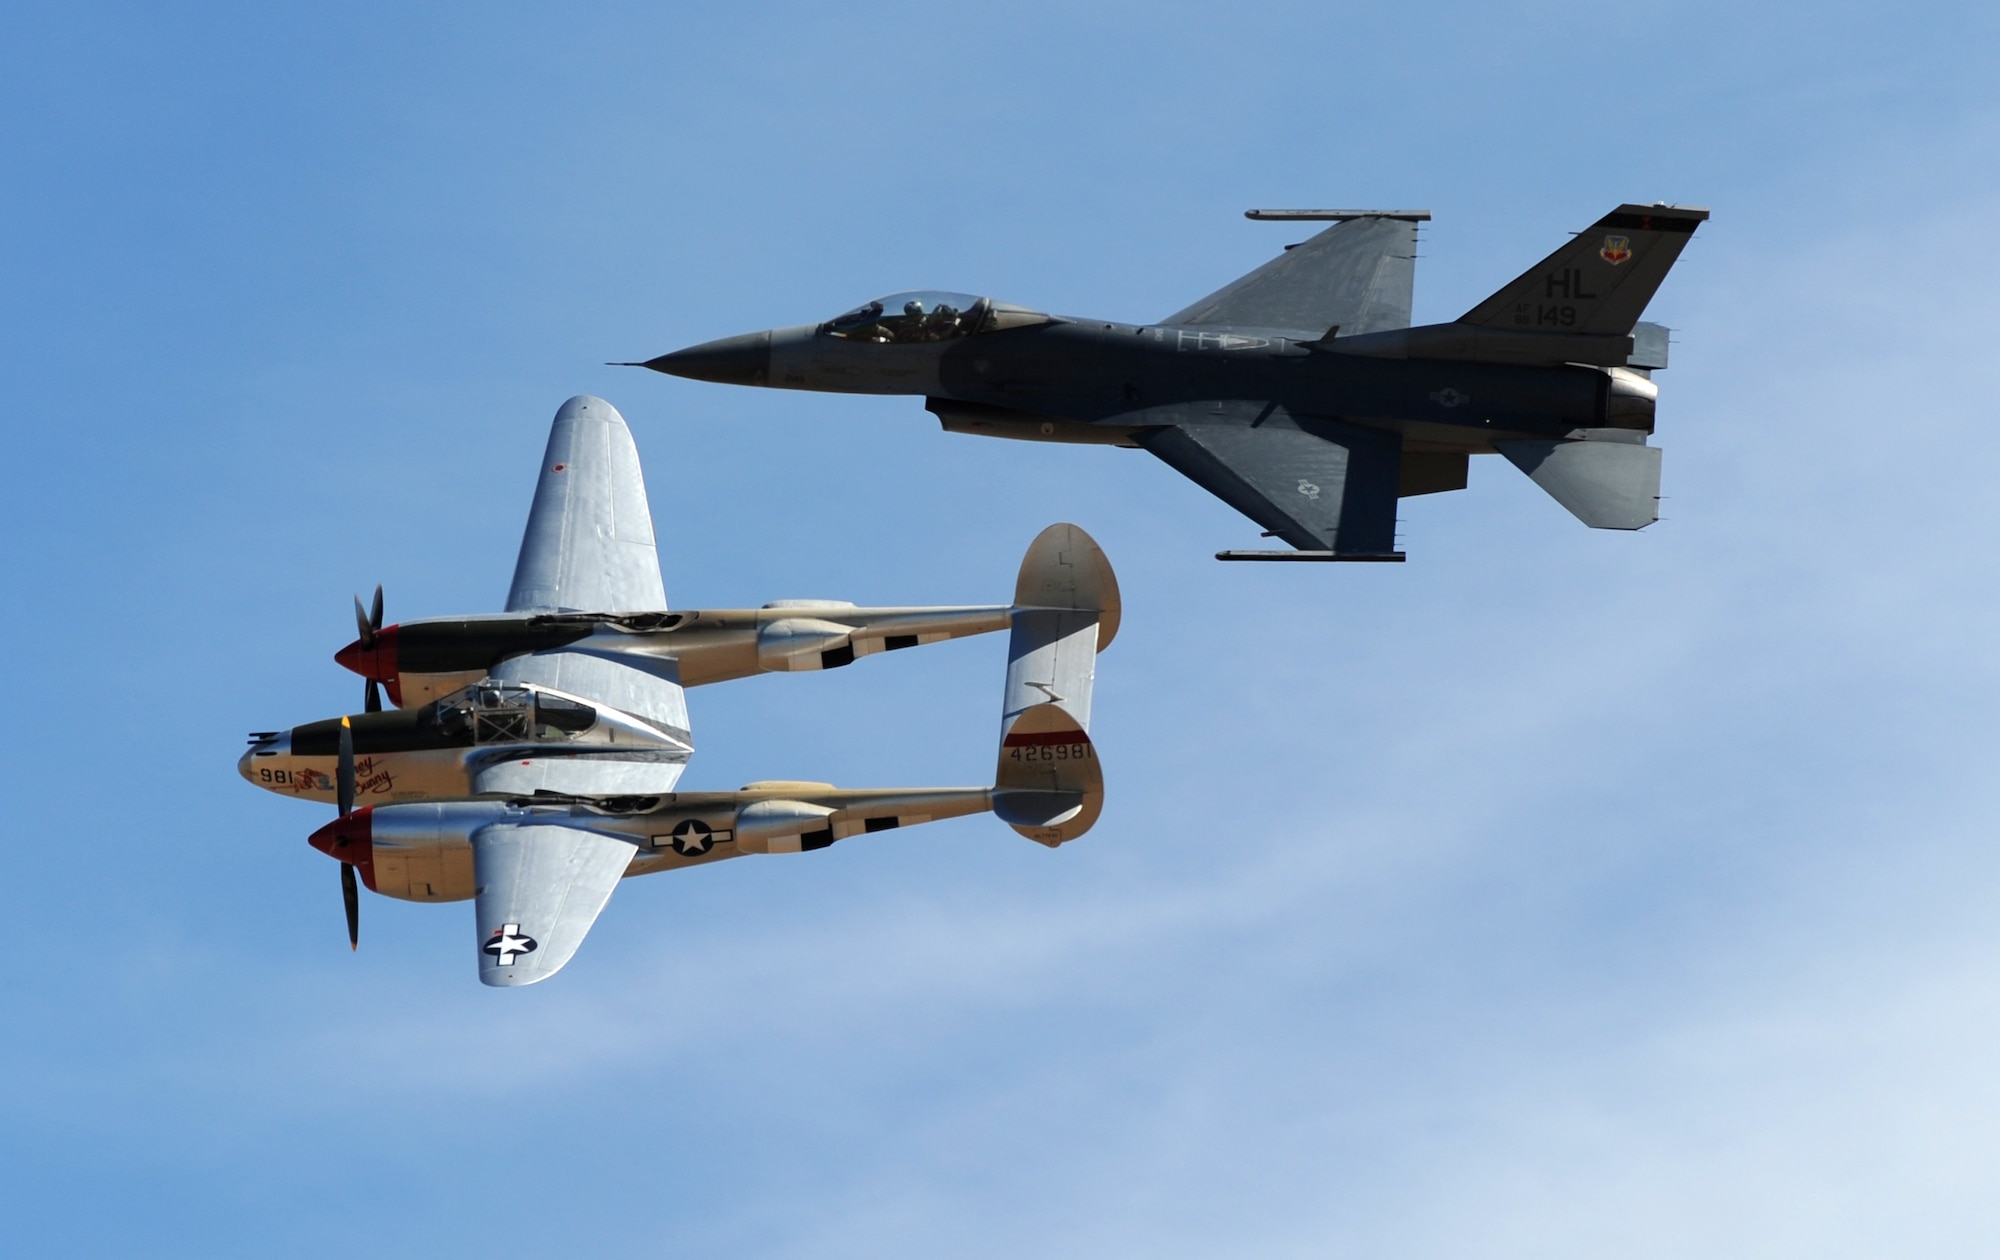 A vintage P-38 Lighting and an Air Force F-16 Fighting Falcon fighter aircraft perform a heritage flight during the Capital City Air Show at Mather Airport, Sacramento, Calif., Sept. 8, 2012. The Heritage Flight program represents the evolution of Air Force airpower by flying today's state-of-the-art fighter aircraft in close formation with a historic fighter aircraft. (U.S. Air Force photo by Staff Sgt. Robert M. Trujillo)